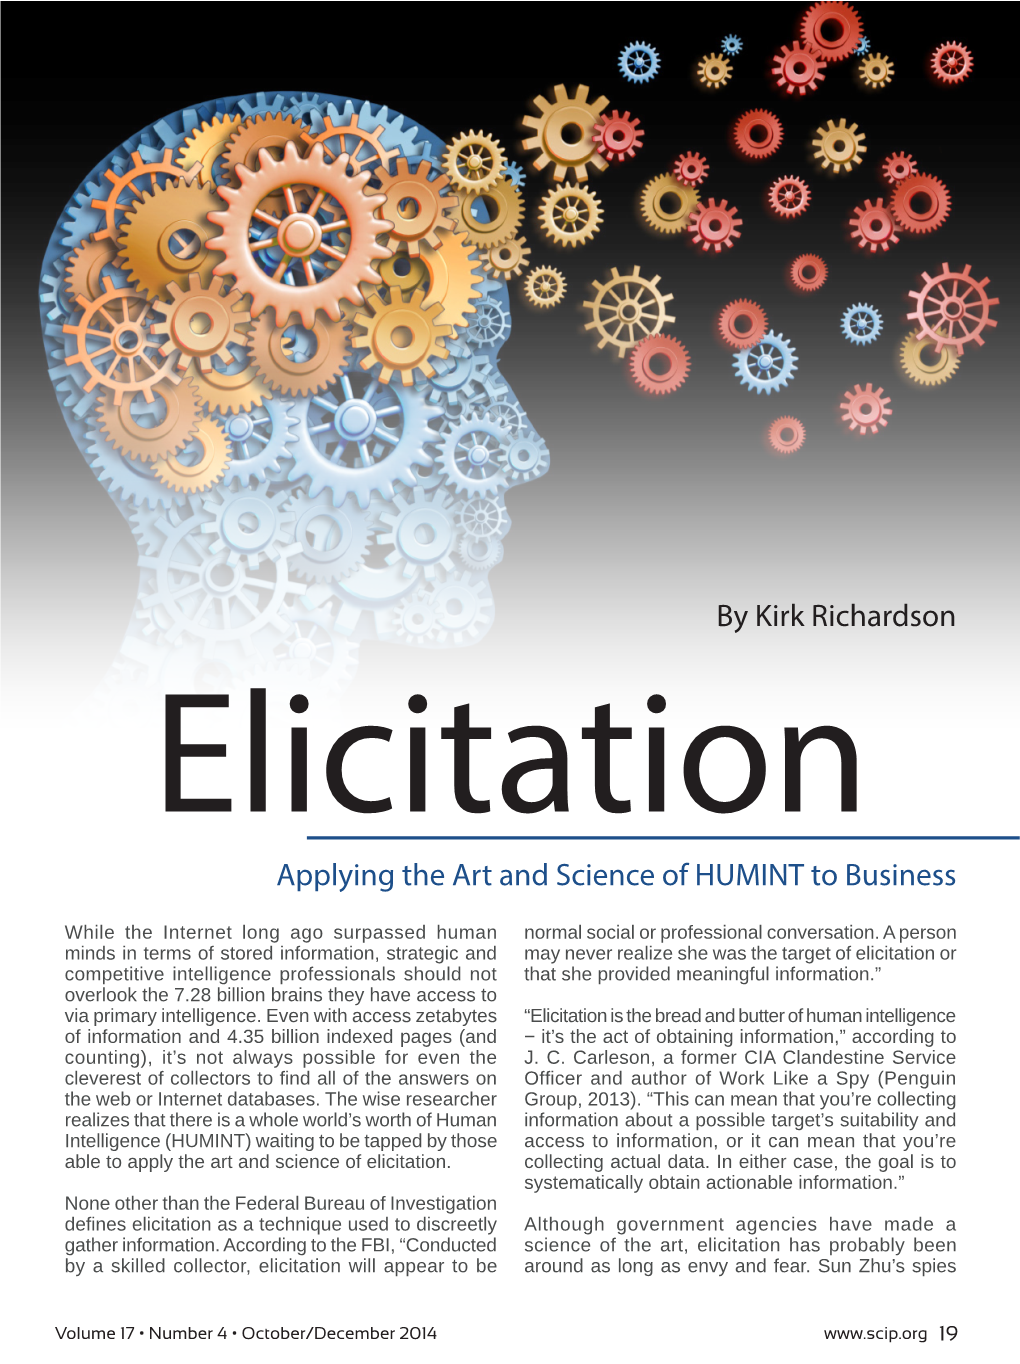 Elicitation Applying the Art and Science of HUMINT to Business